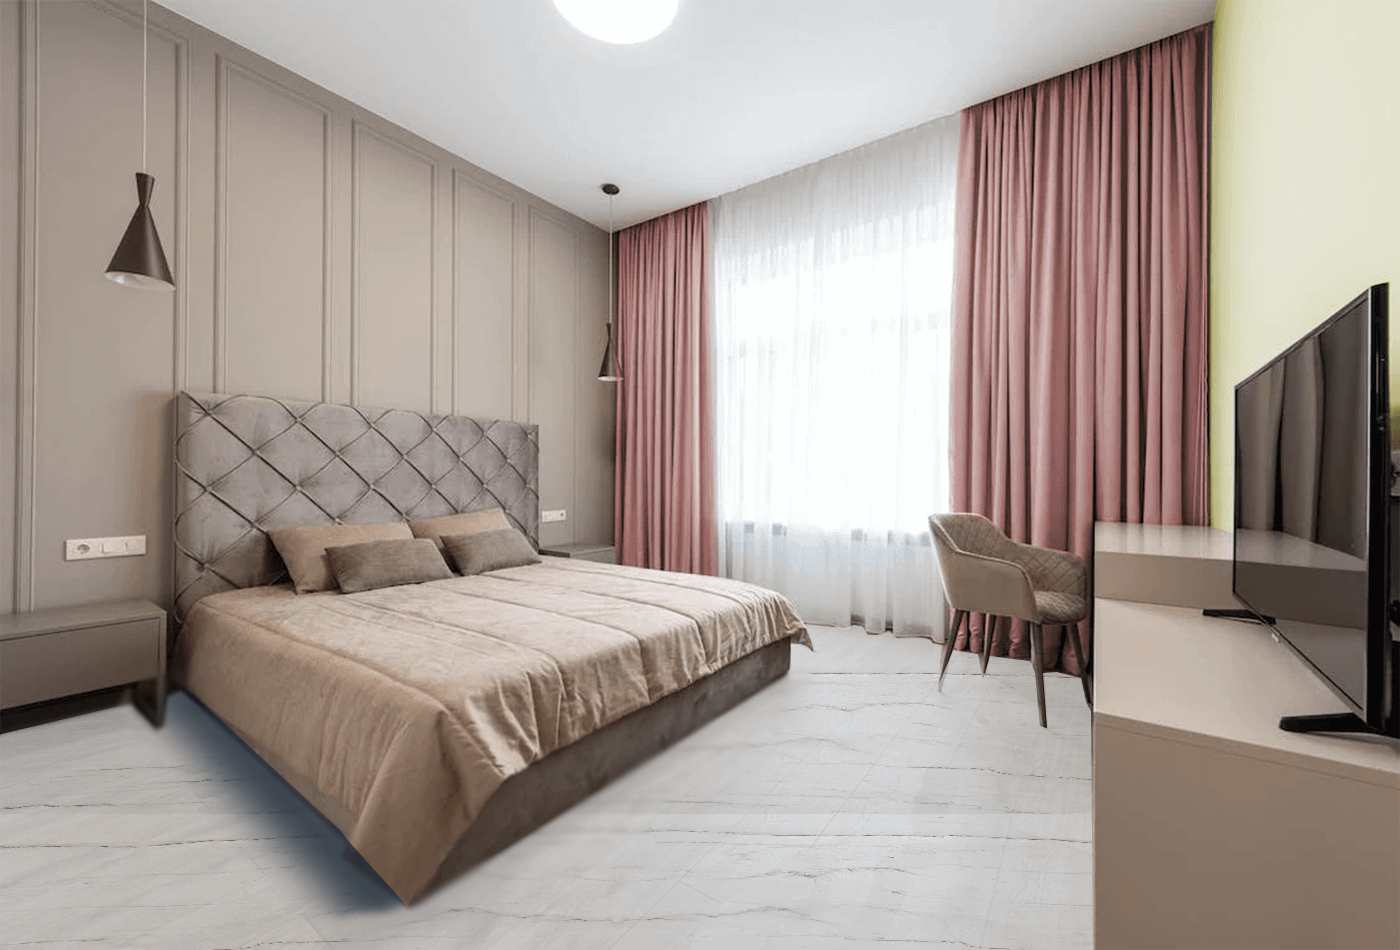 Decked-Up Boheme Quartzite Bedrooms with Curtains